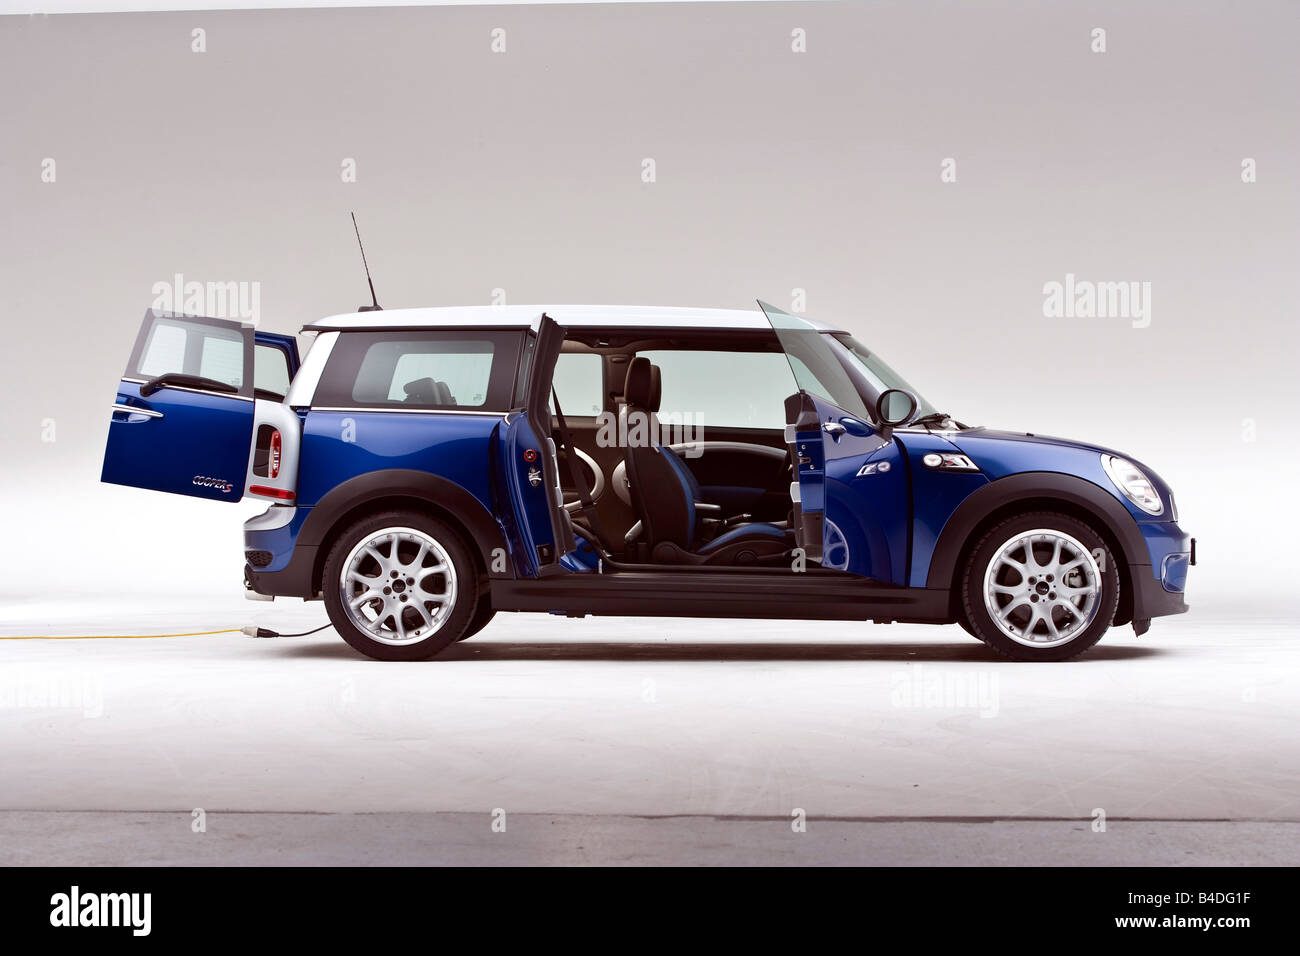 Mini Clubman, model year 2007-, blue, standing, upholding, side view, Studio admission Stock Photo